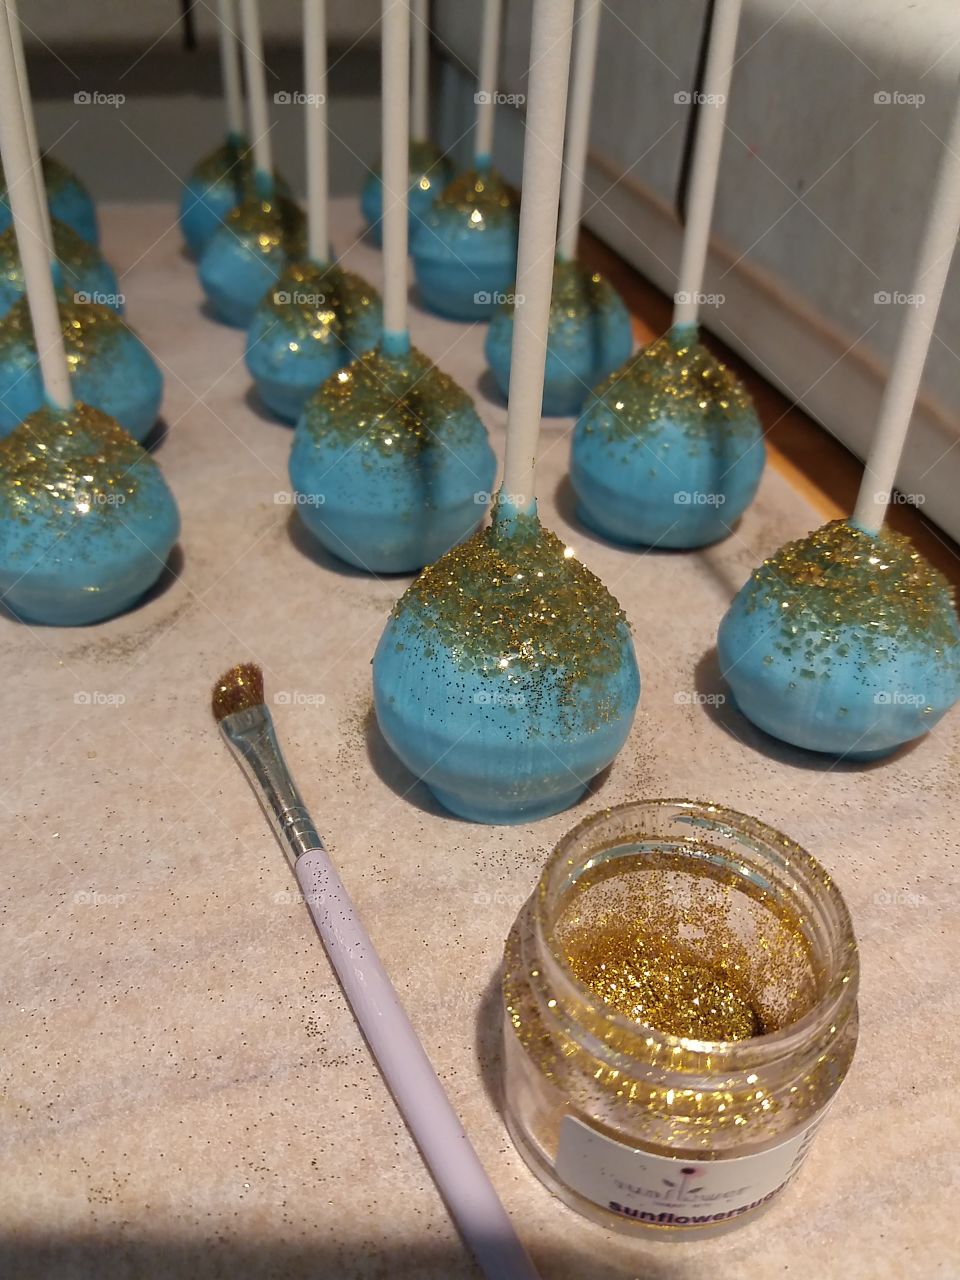 Glitter cake pops fit for a princess!